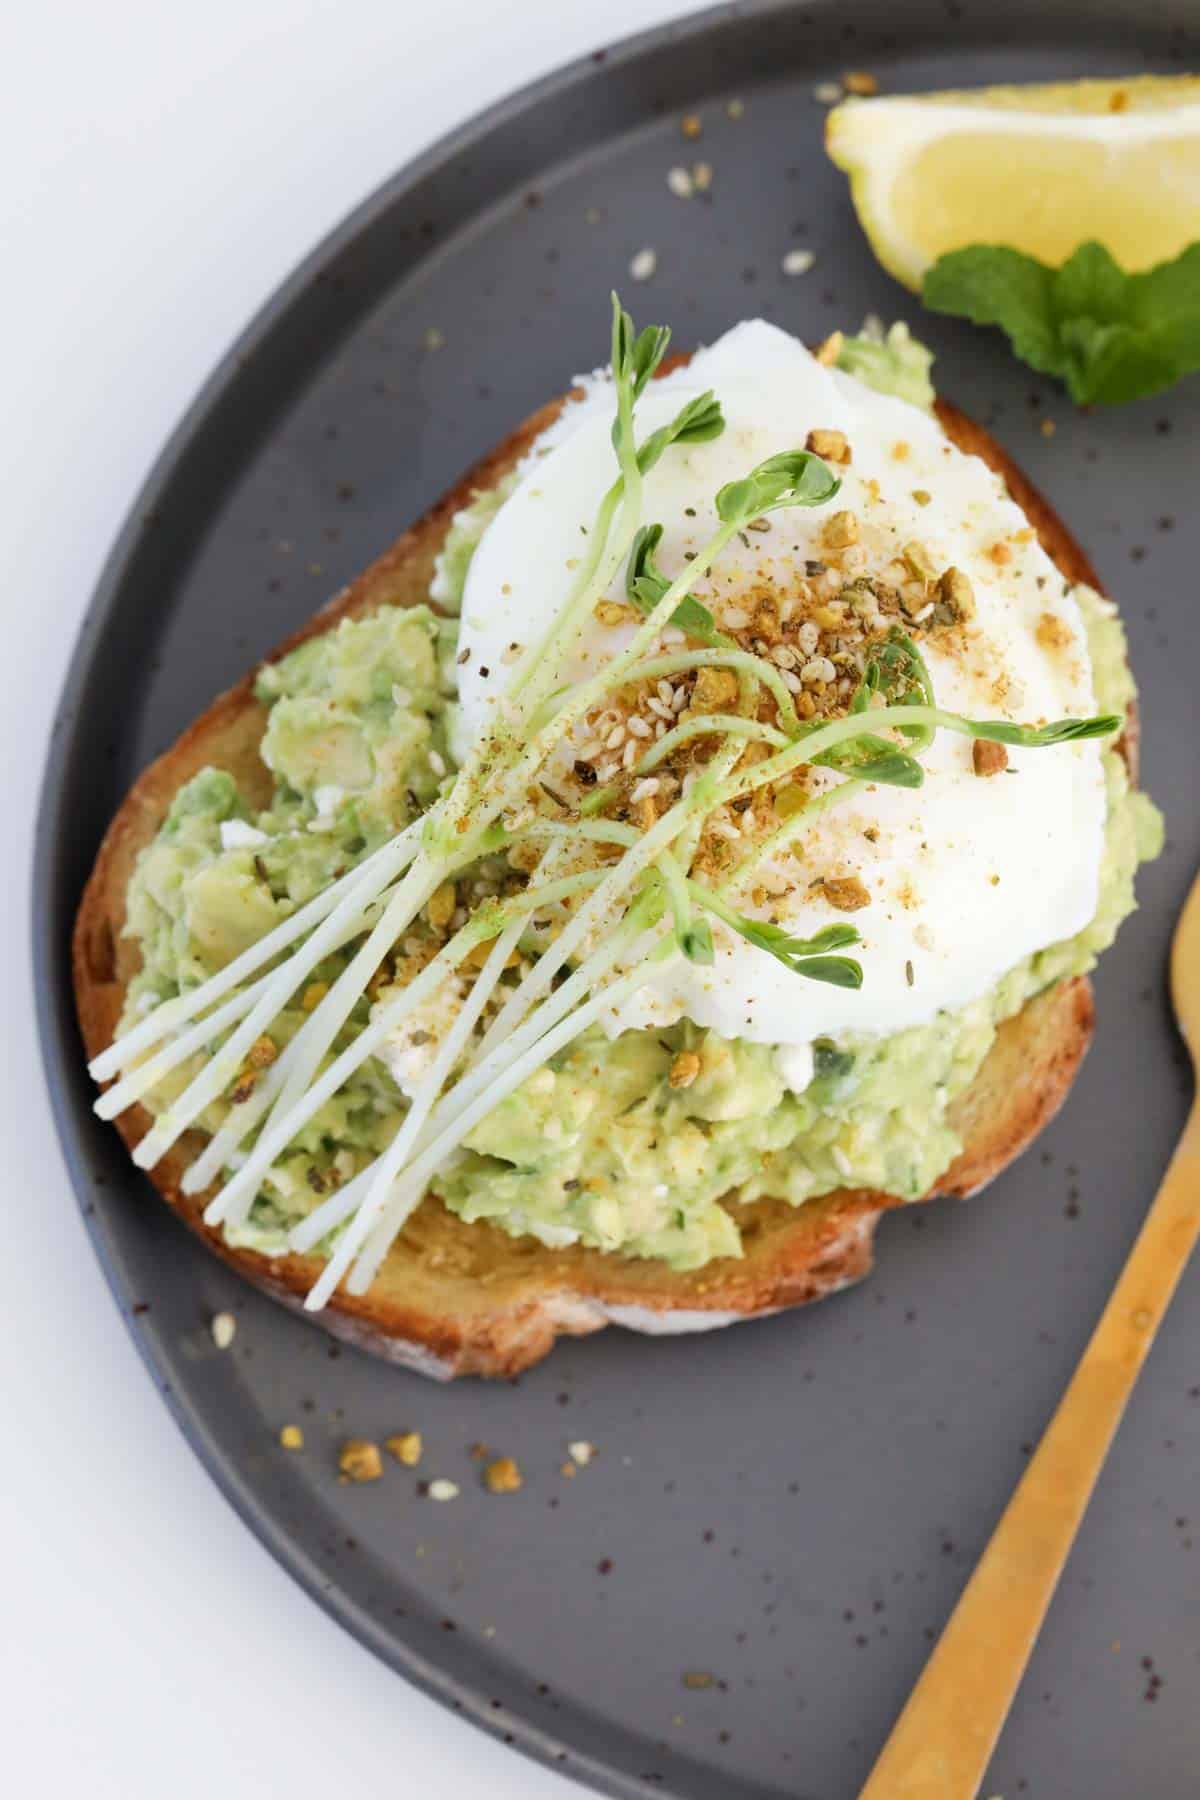 A slice of smashed avocado on toast, served on a black plate topped with a poached egg.